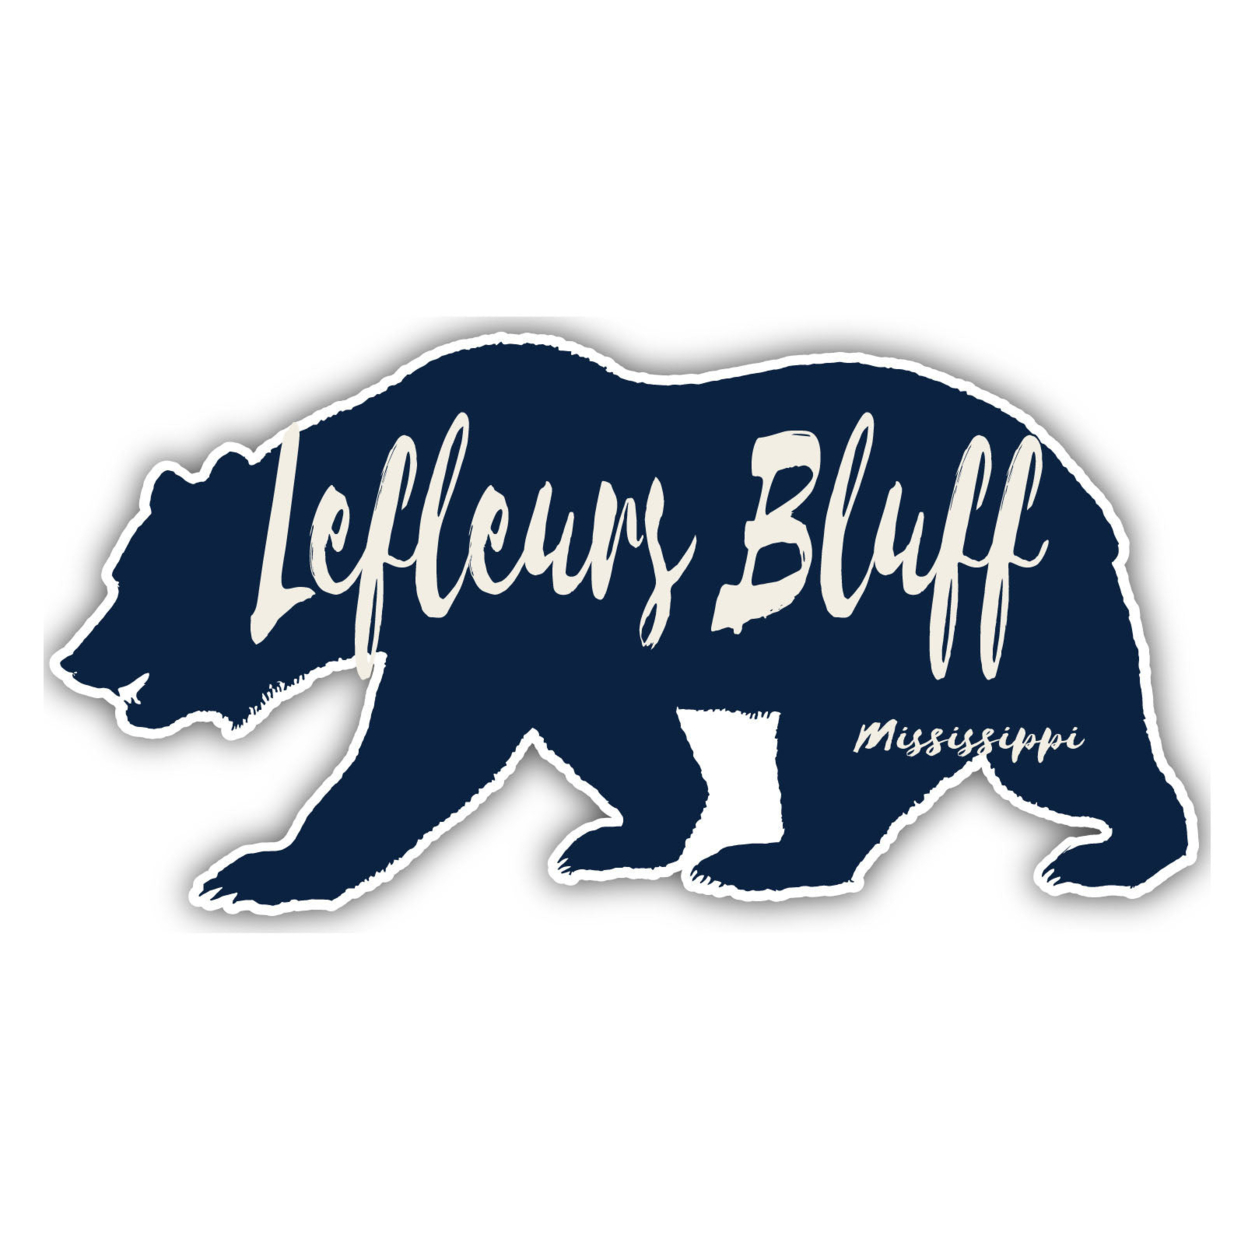 Lefleurs Bluff Mississippi Souvenir Decorative Stickers (Choose Theme And Size) - 2-Inch, Bear